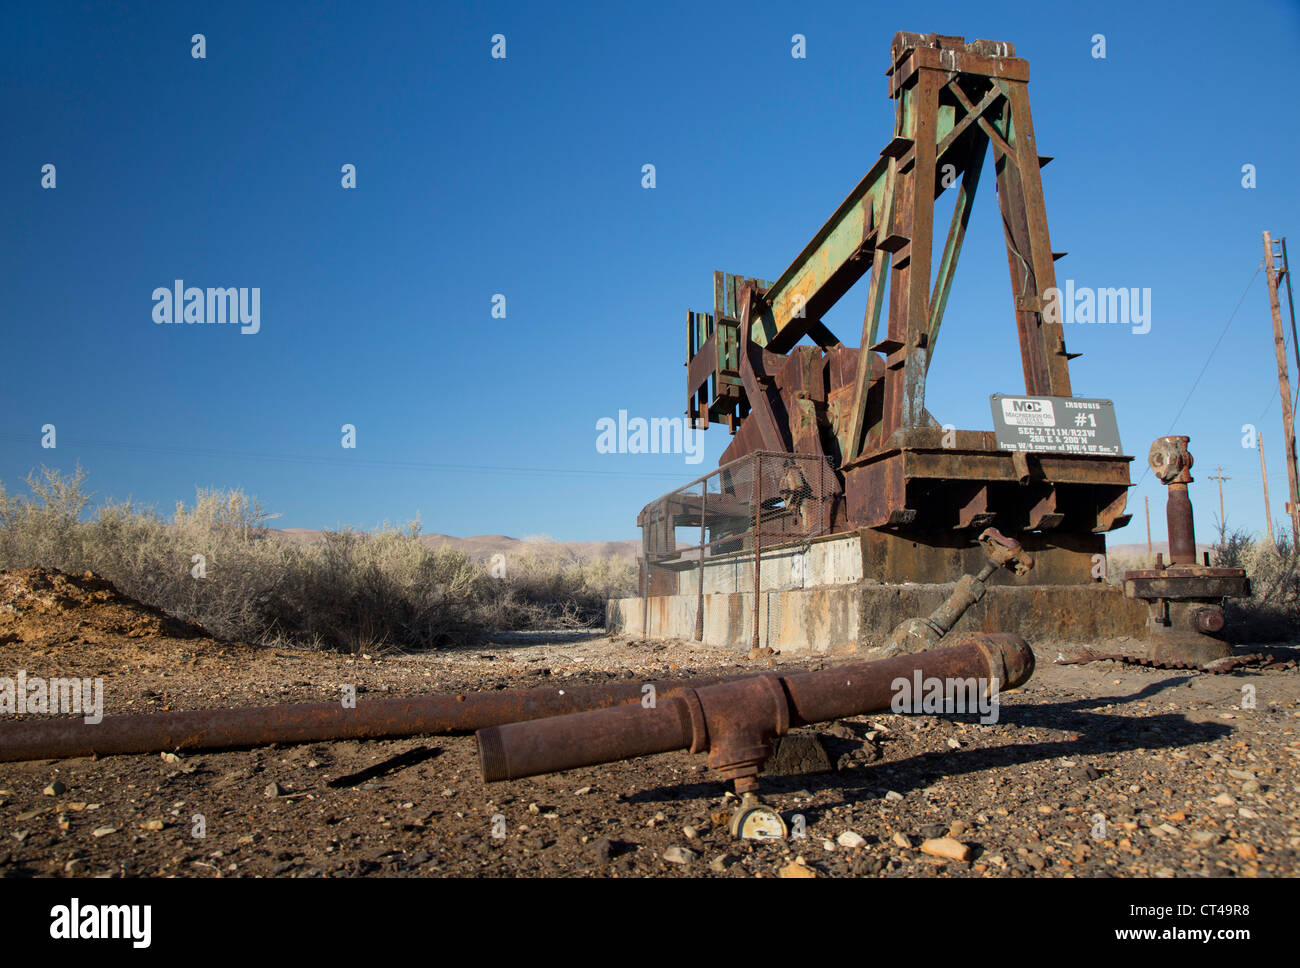 Maricopa, California - An abandoned oil well in the oil and gas fields in southern San Joaquin Valley. Stock Photo